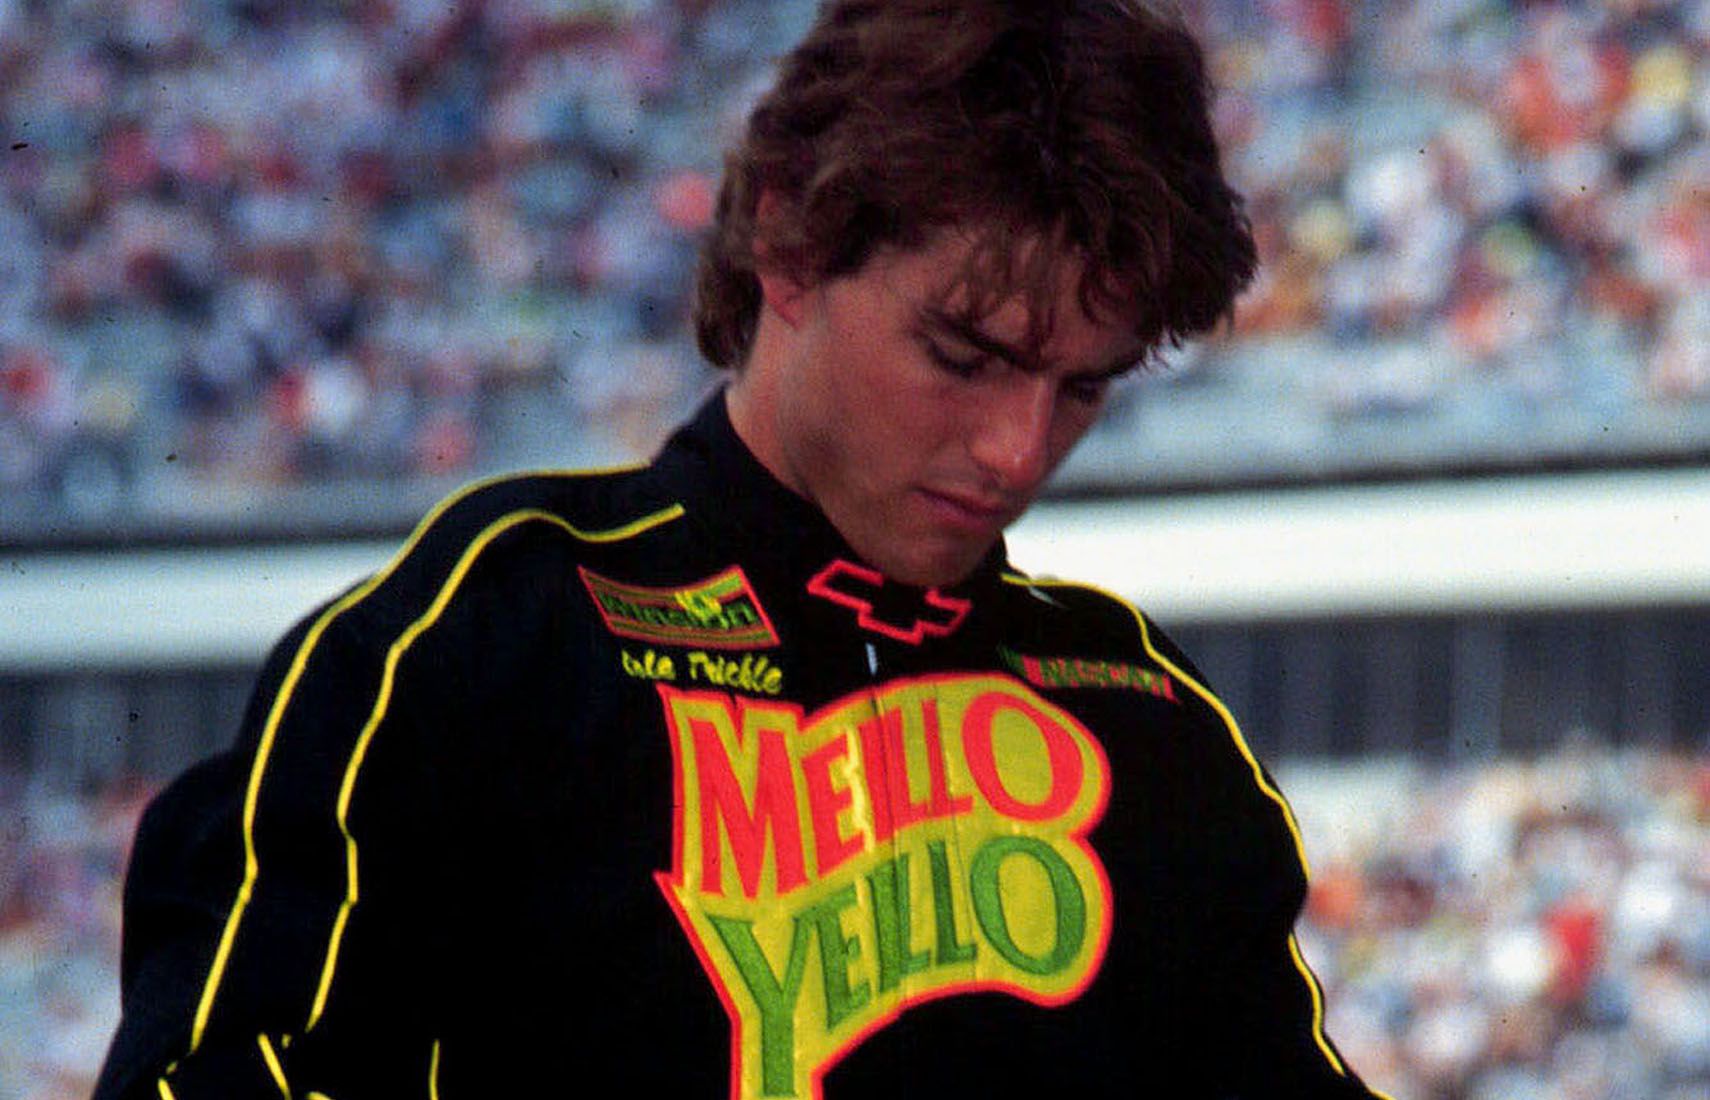 Chevrolet Lumina Was One Cool Movie Car That Was Raced By Tom Cruise In Days Of Thunder